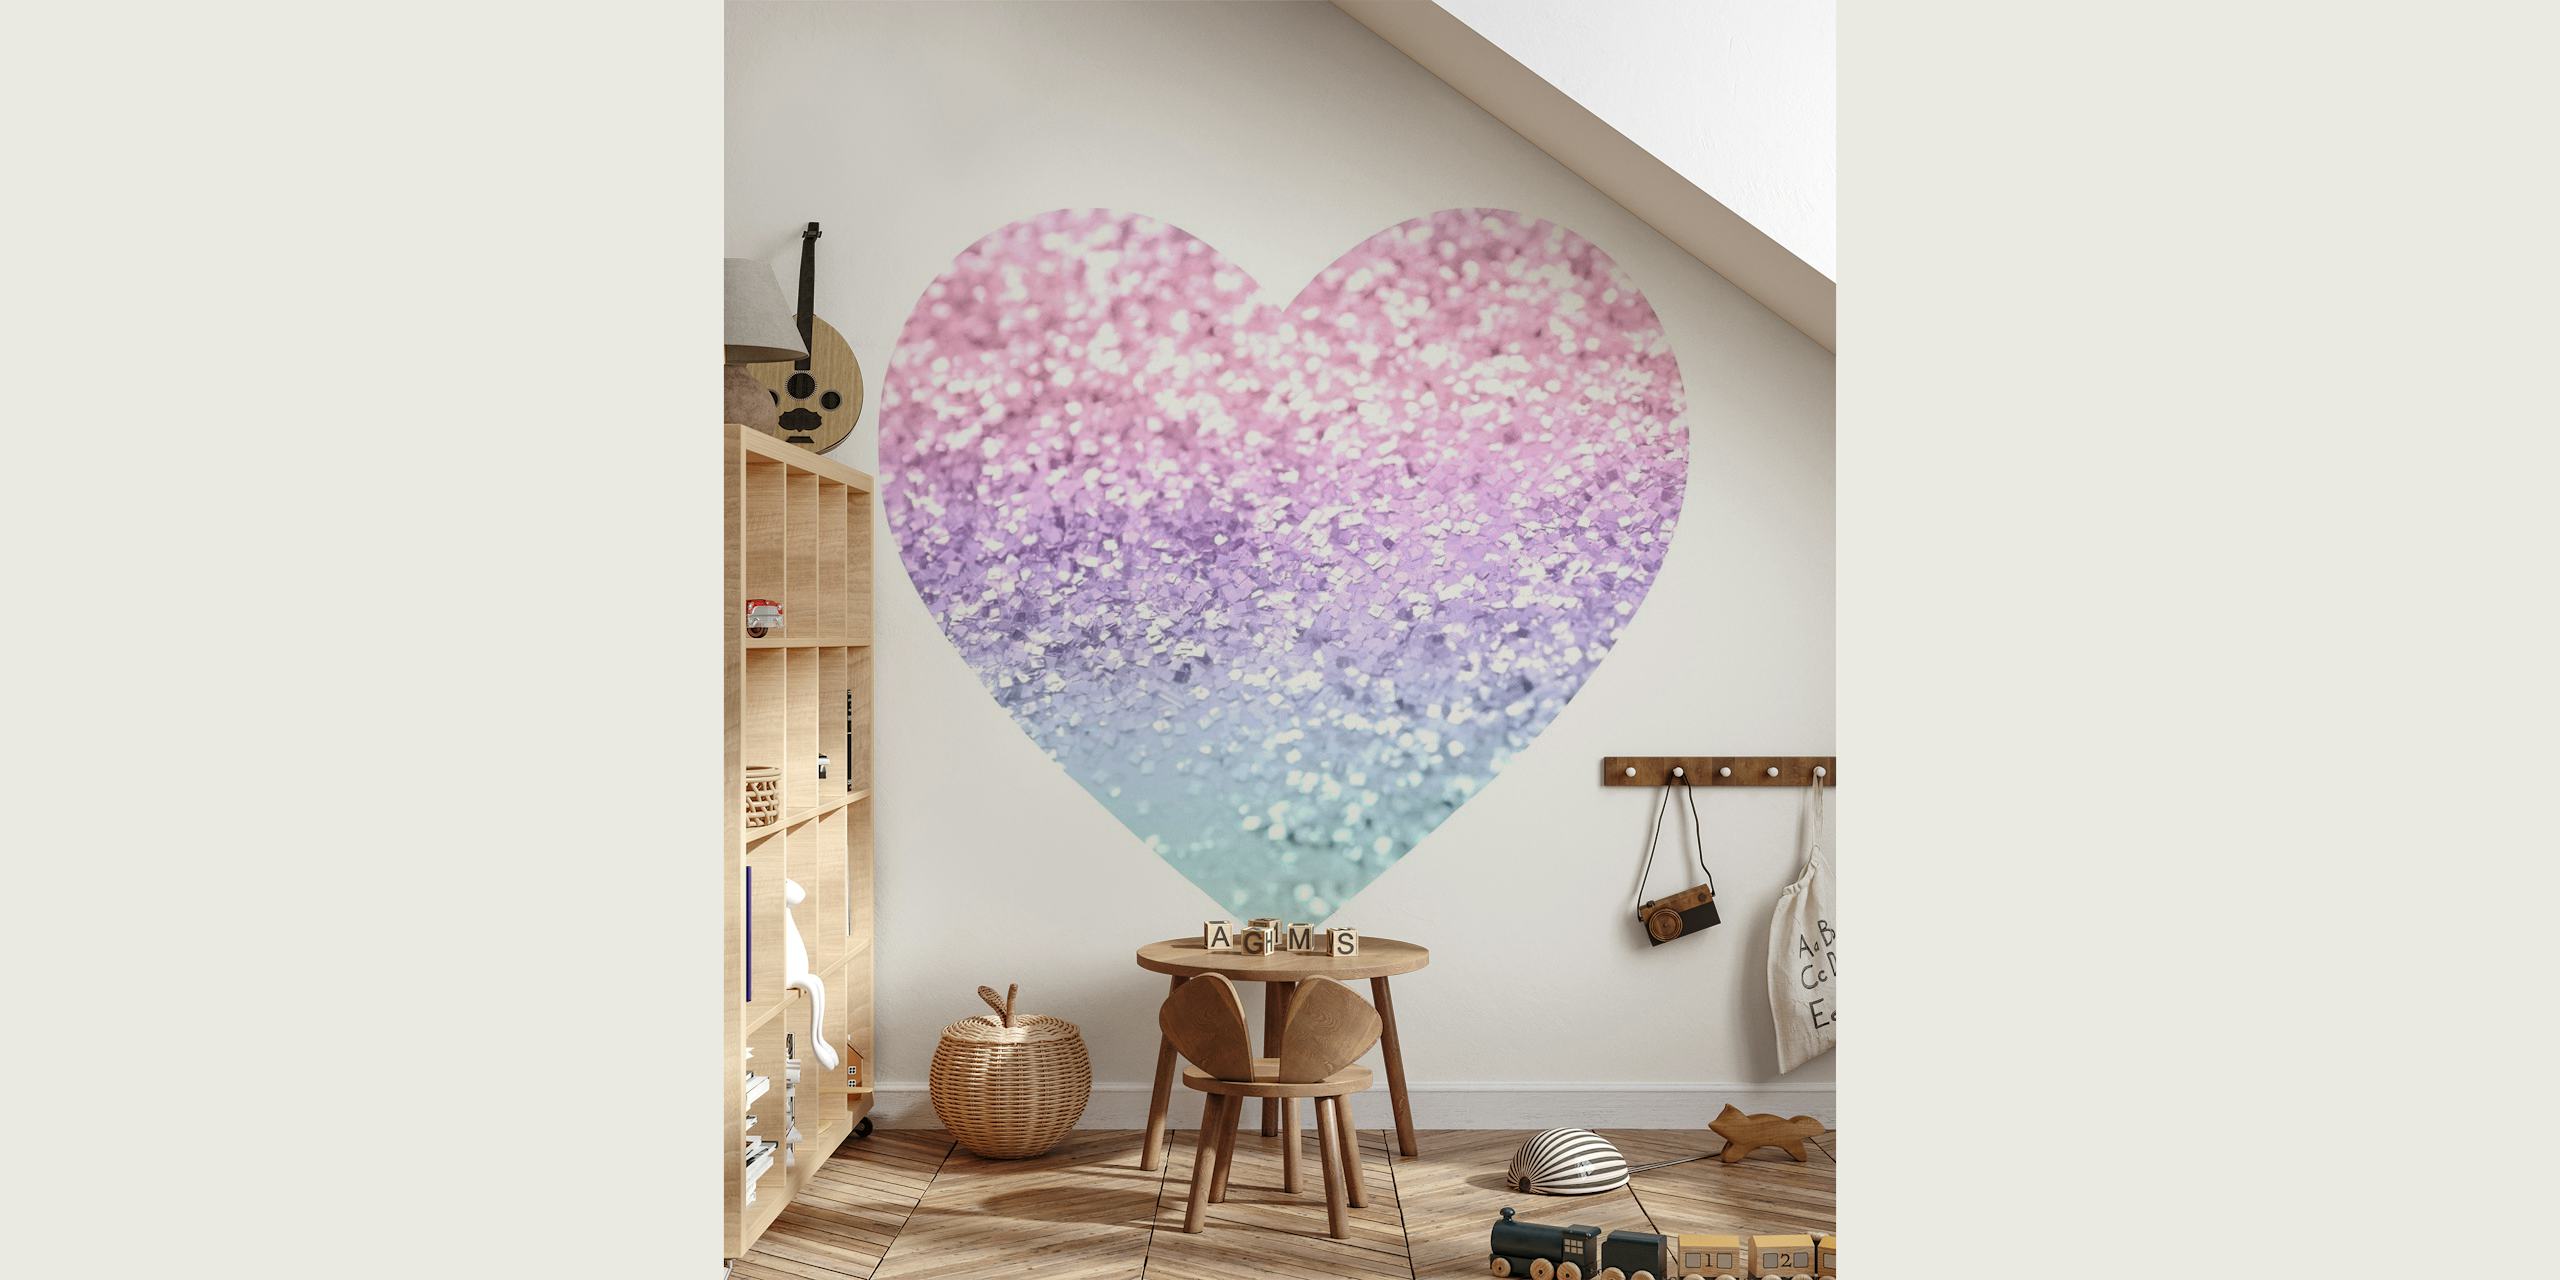 Unicorn-inspired glitter heart wall mural in pink, purple and blue